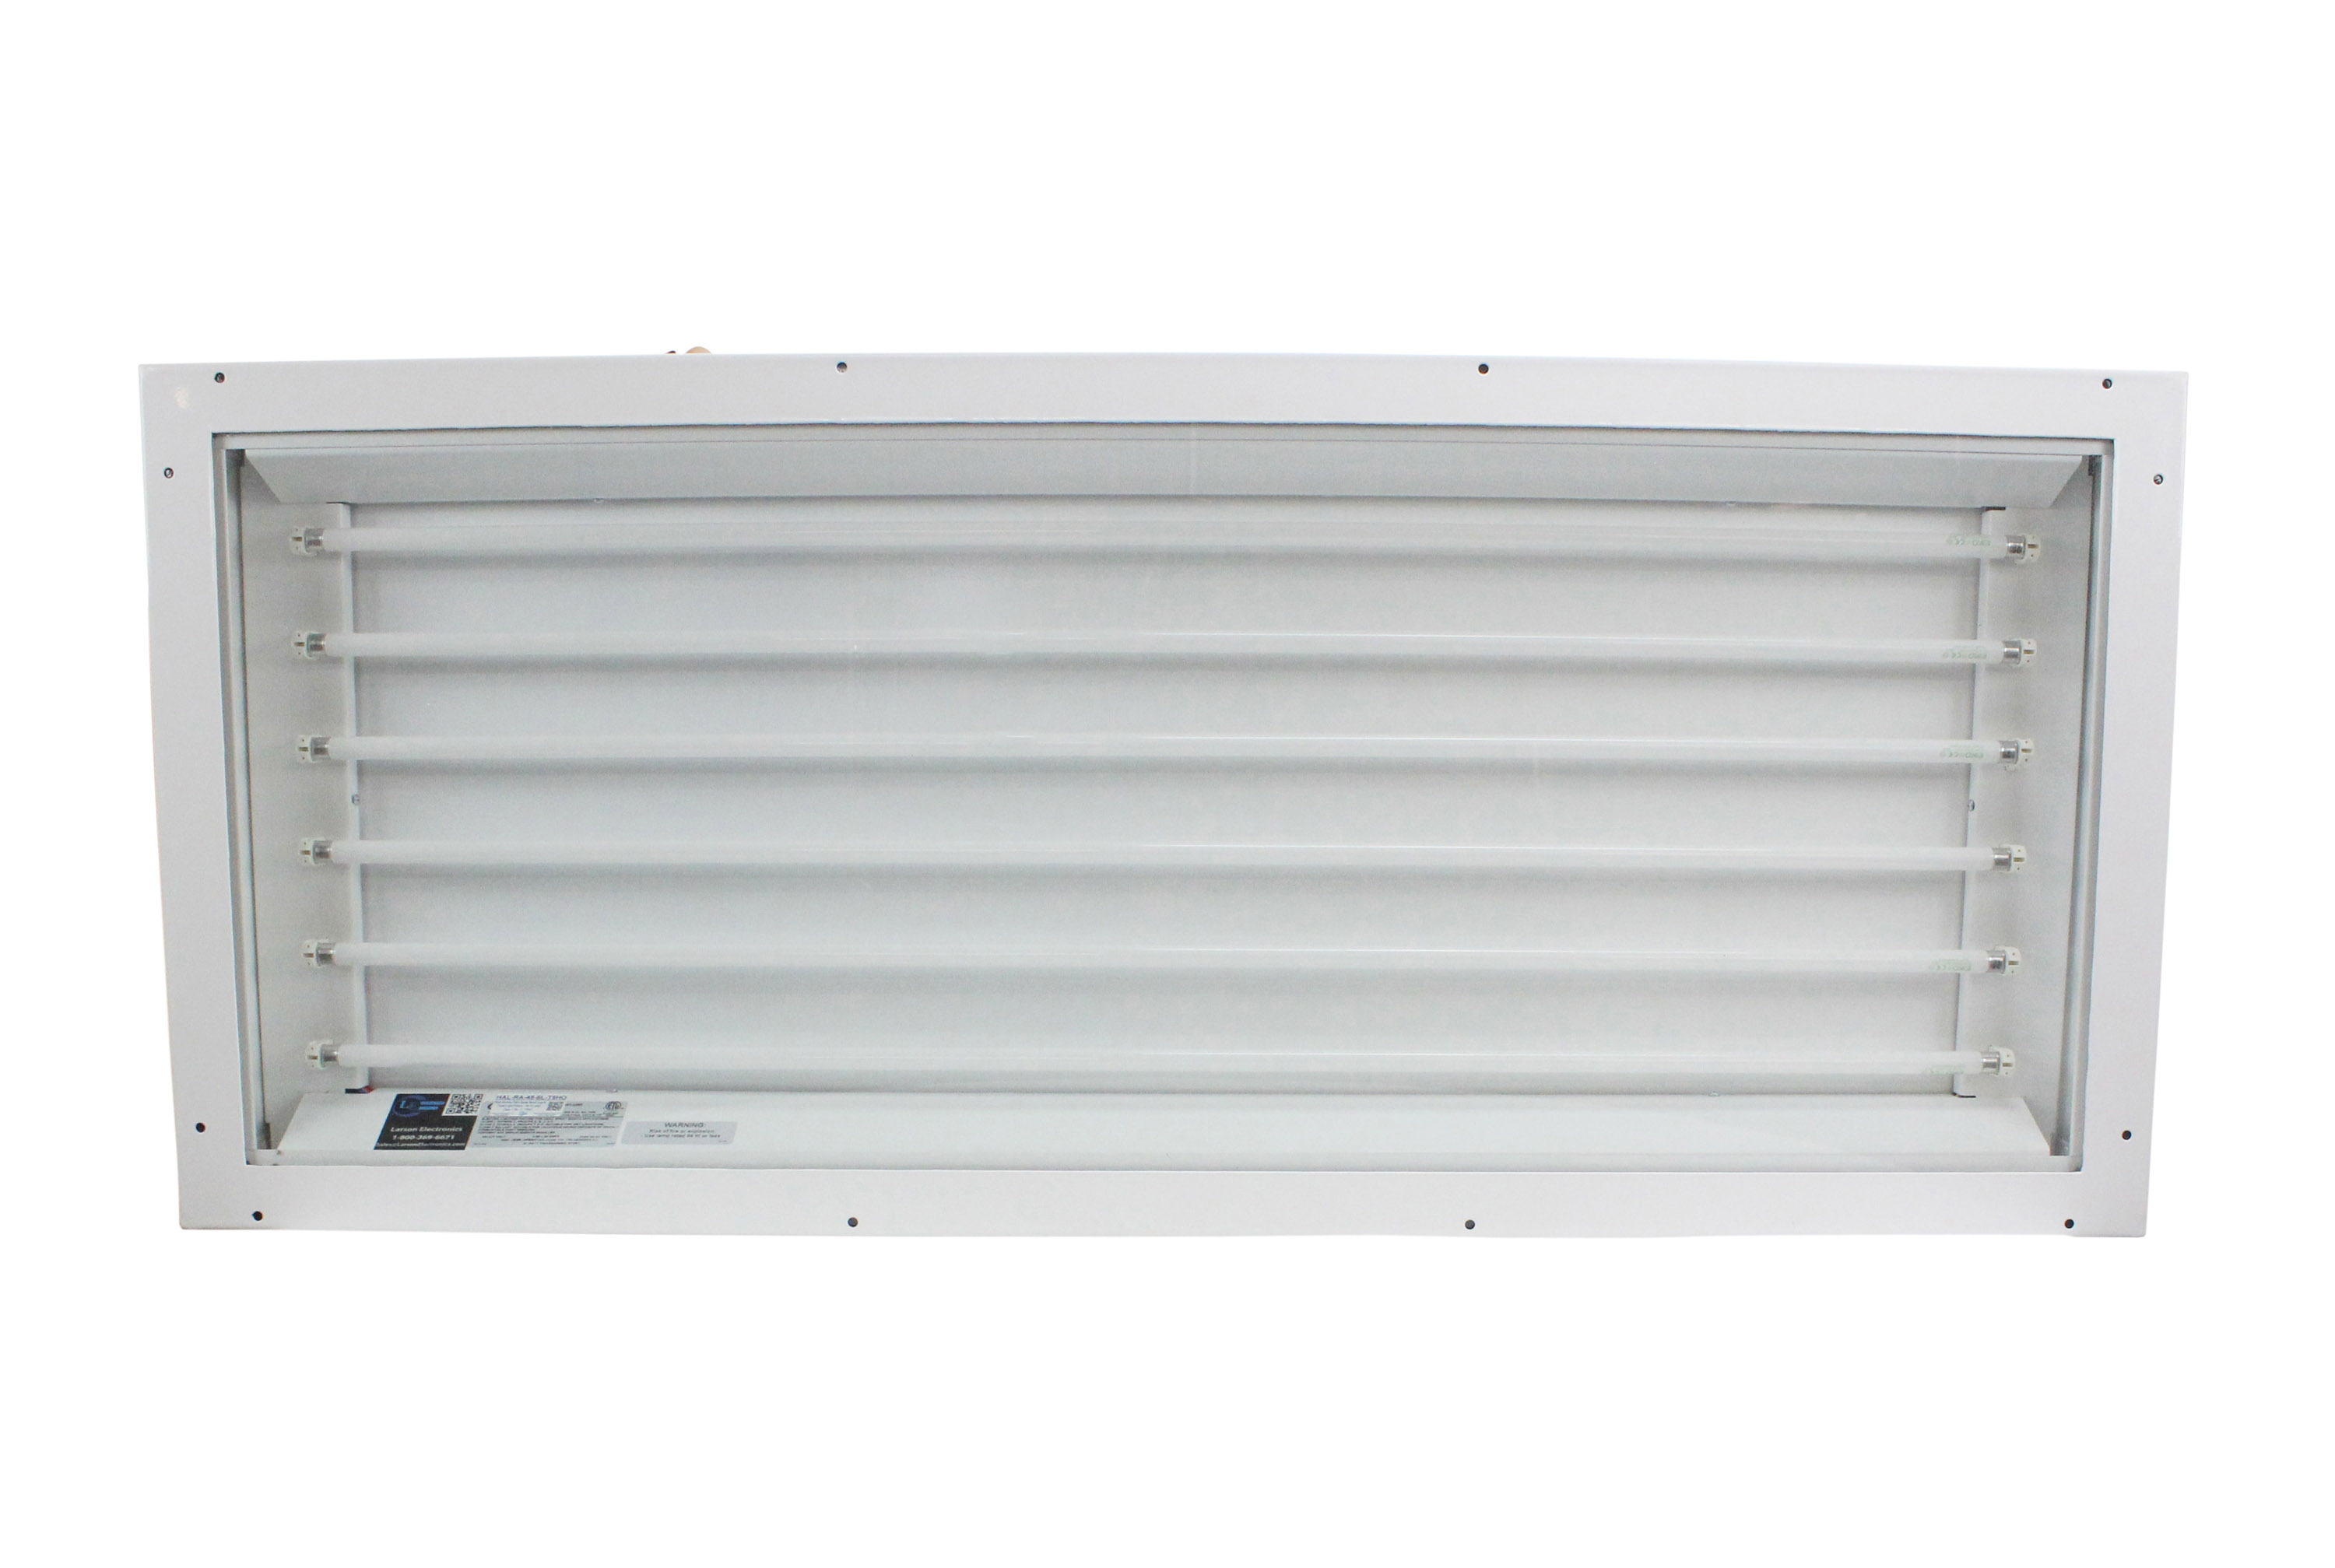 Class 1 Division 2 Fluorescent Light Fixture with Rear Access Panel